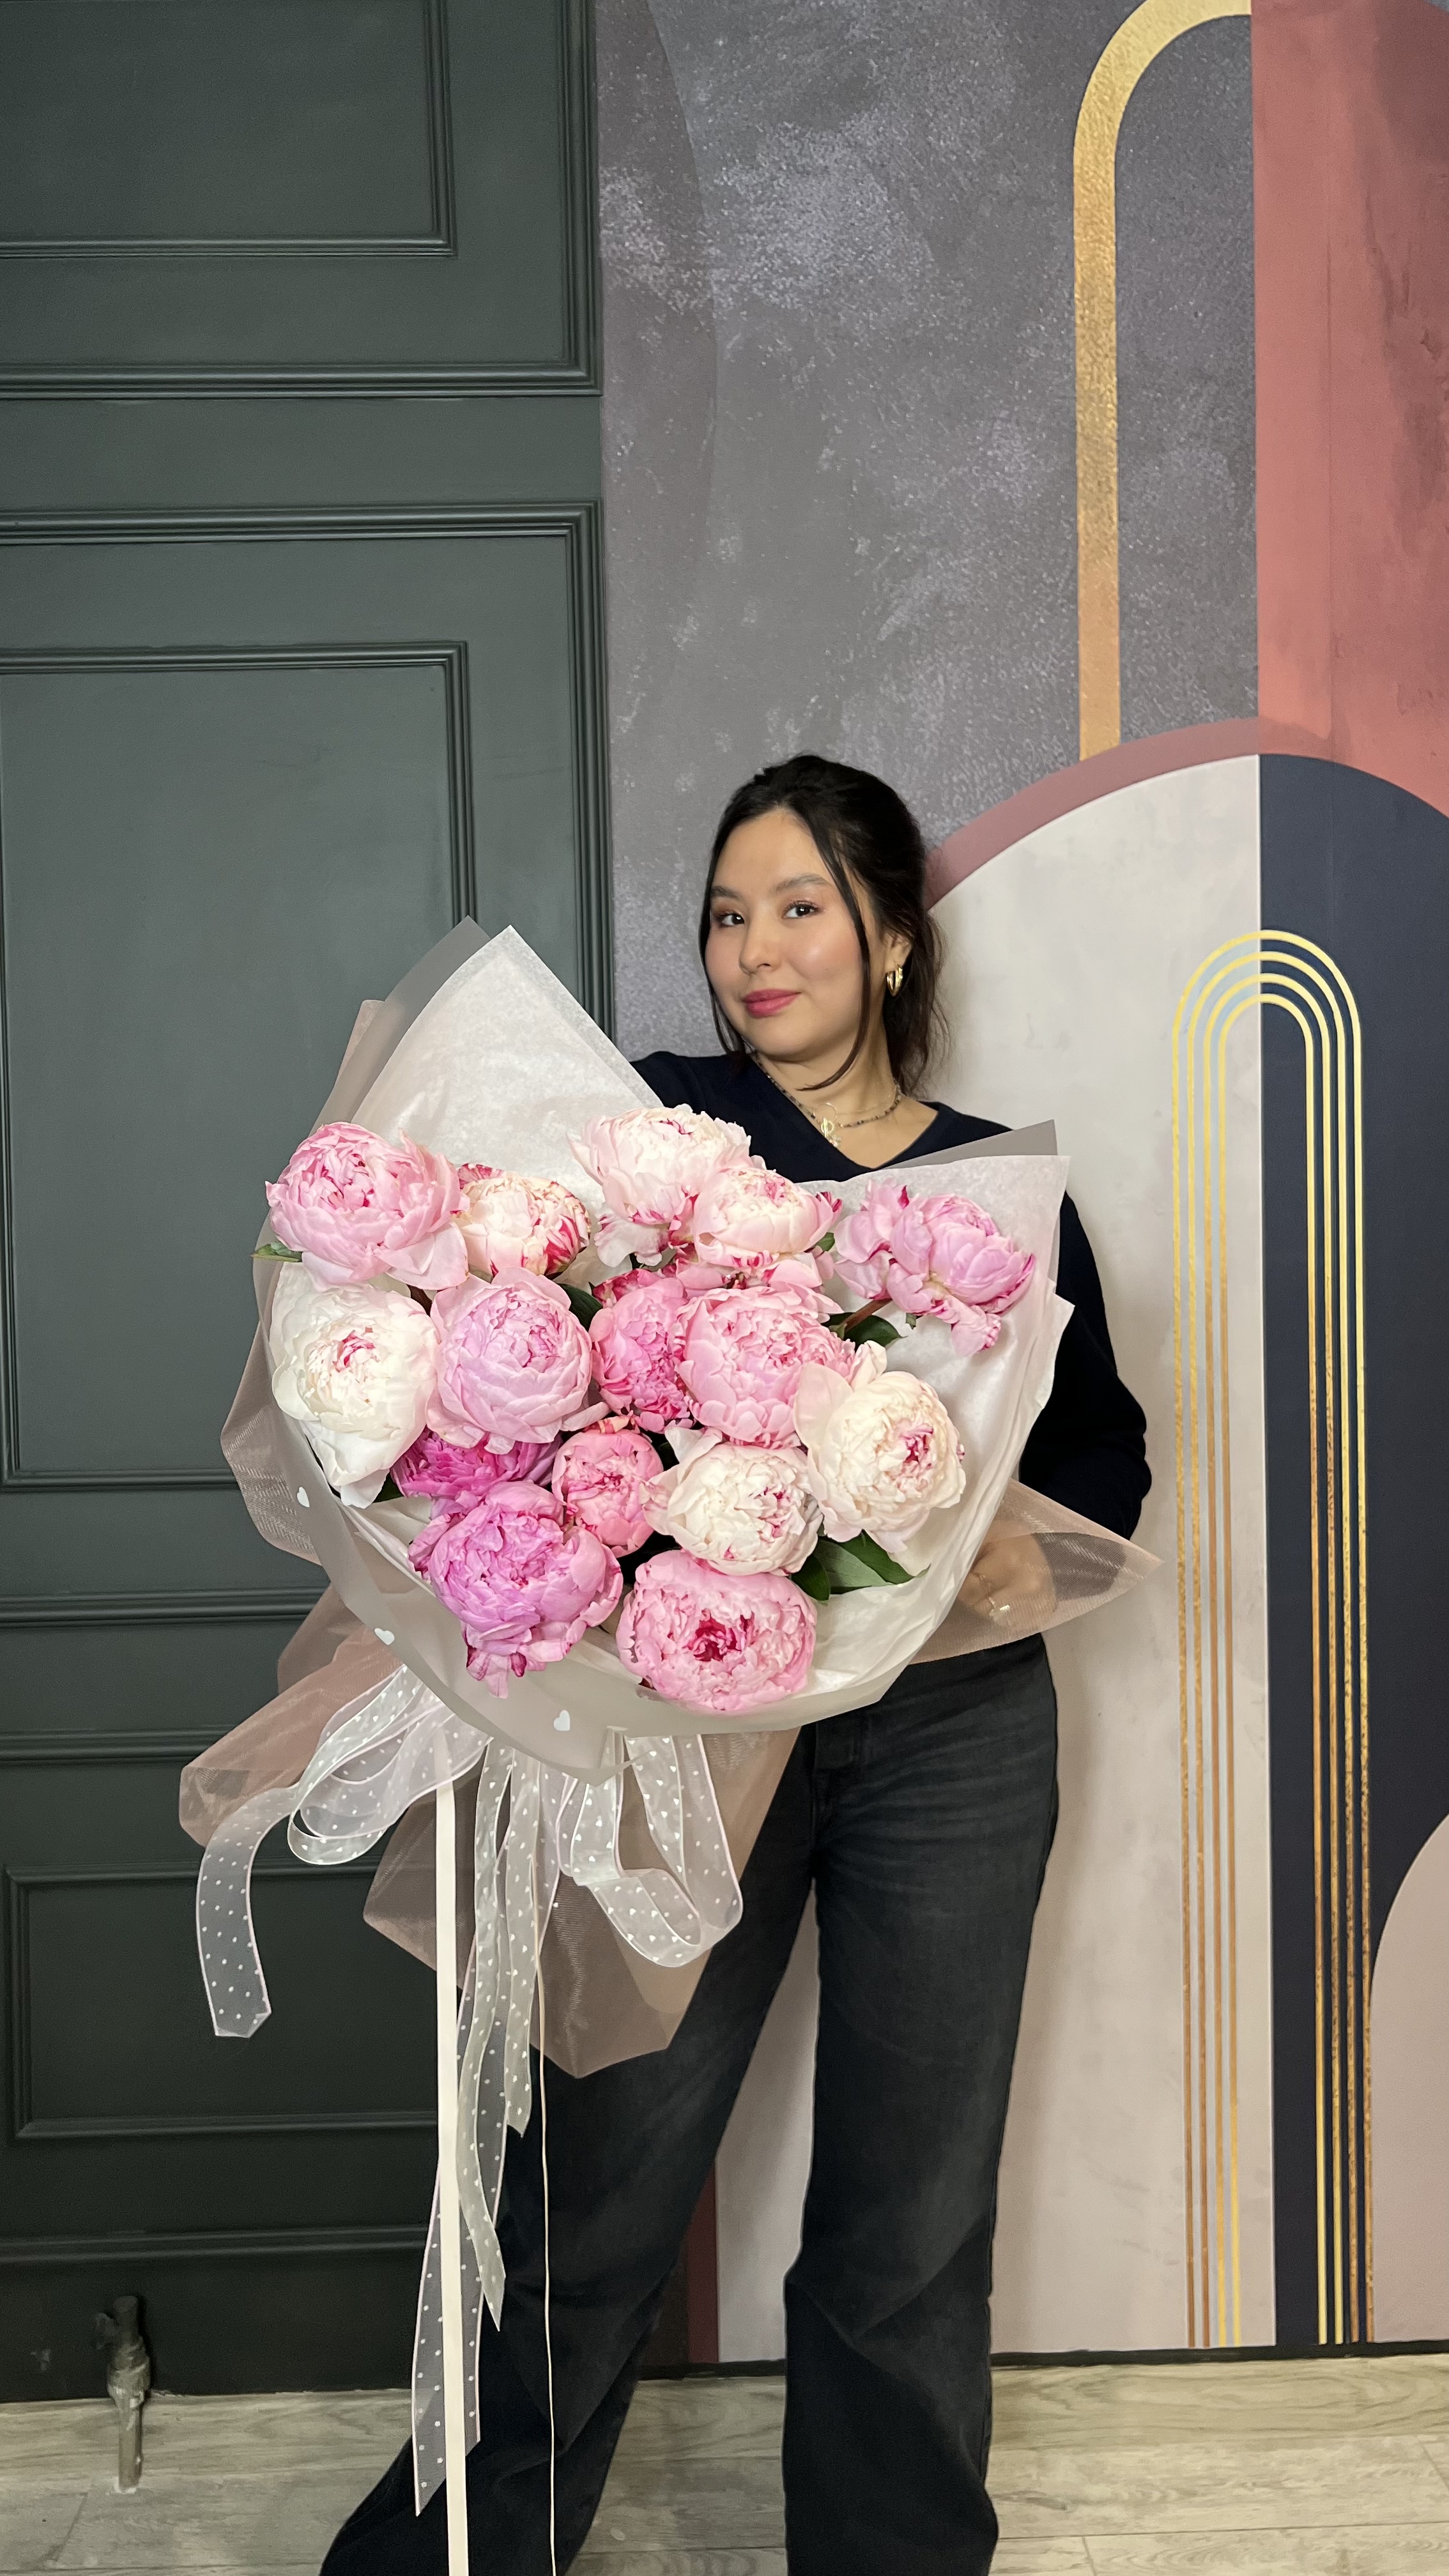 Bouquet of Pione M flowers delivered to Almaty